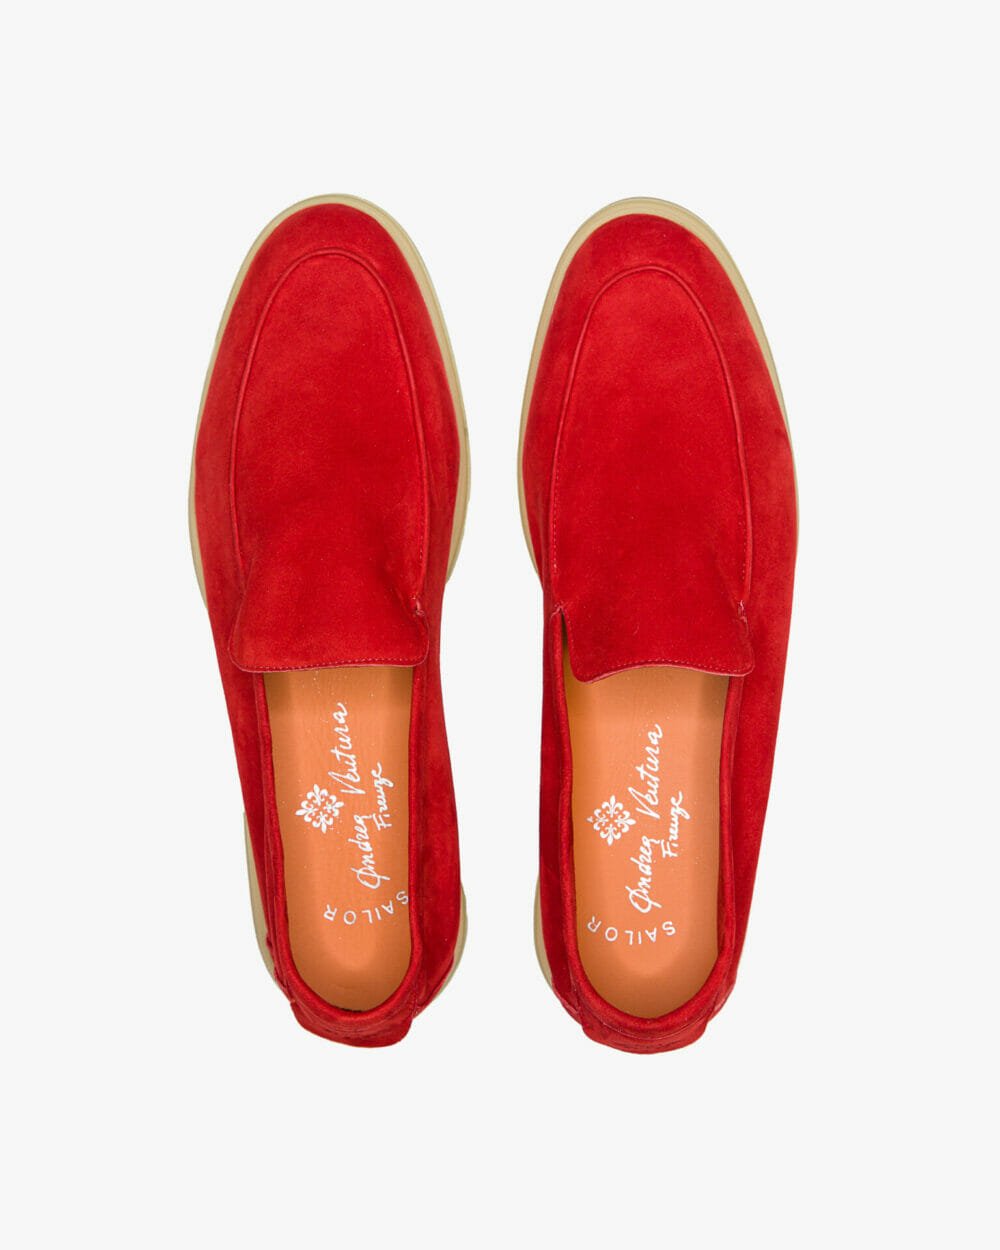 Aq-D-coaast-red-suede-from-above